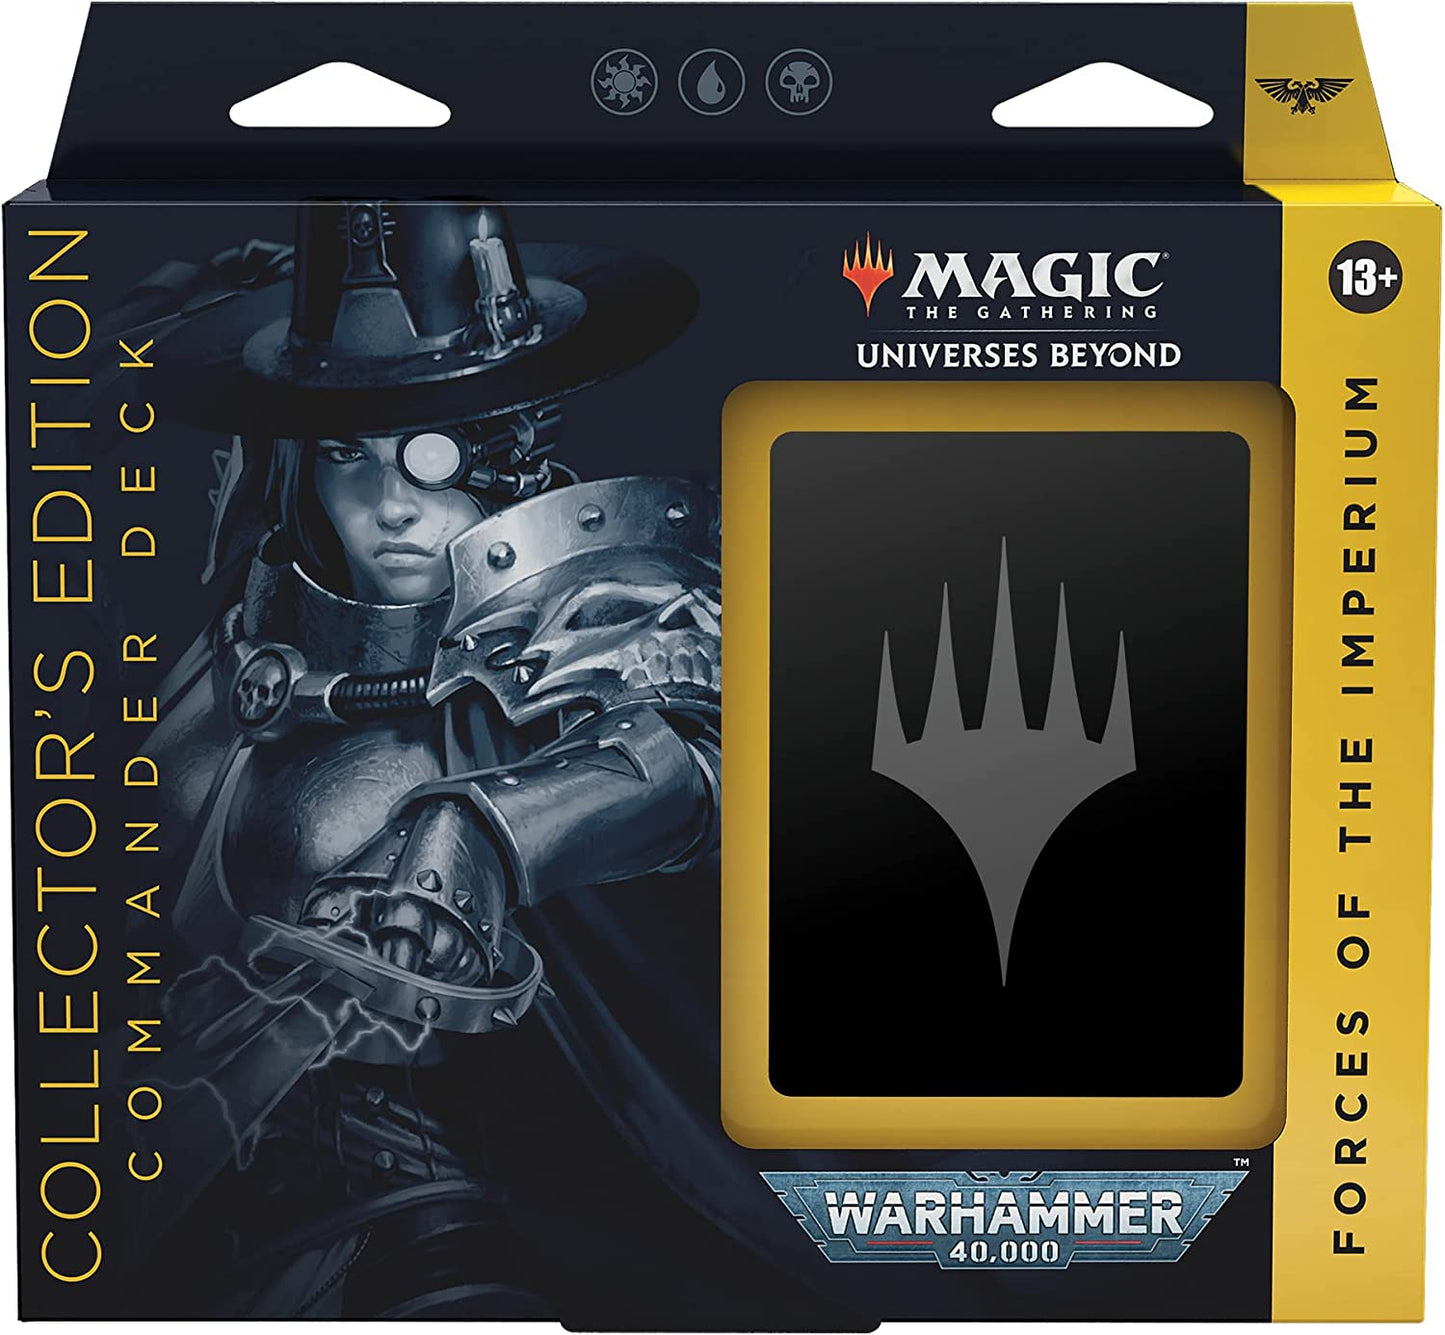 Magic: The Gathering Commander Deck Case - Universes Beyond: Warhammer 40,000 (Foil Collector's Edition) - All 4 Decks